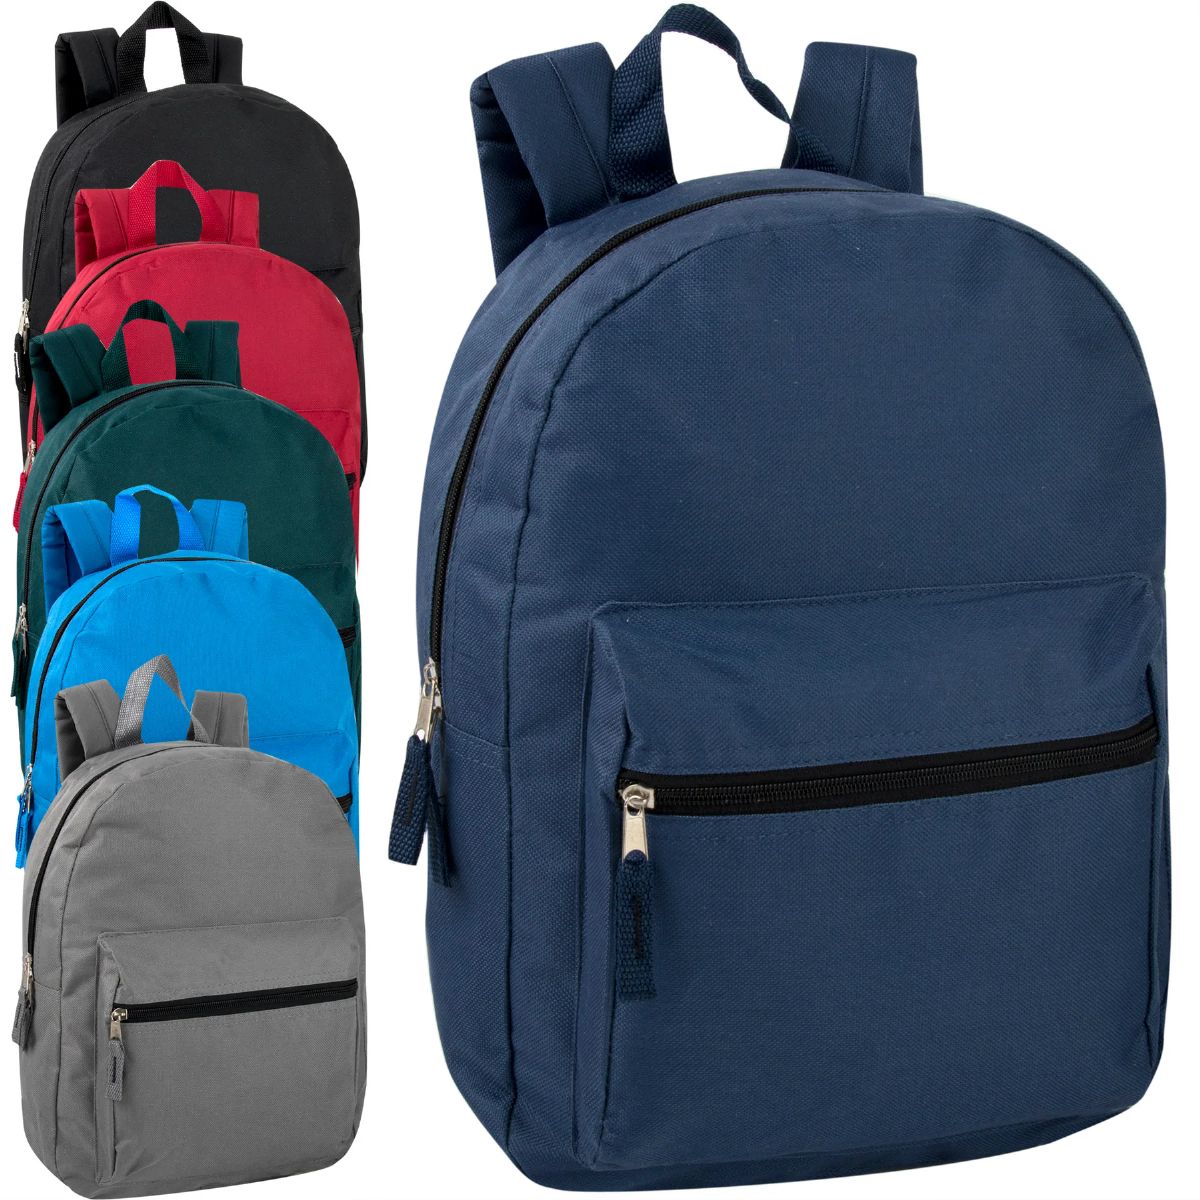 24 Pieces of 15 Inch Basic Backpack